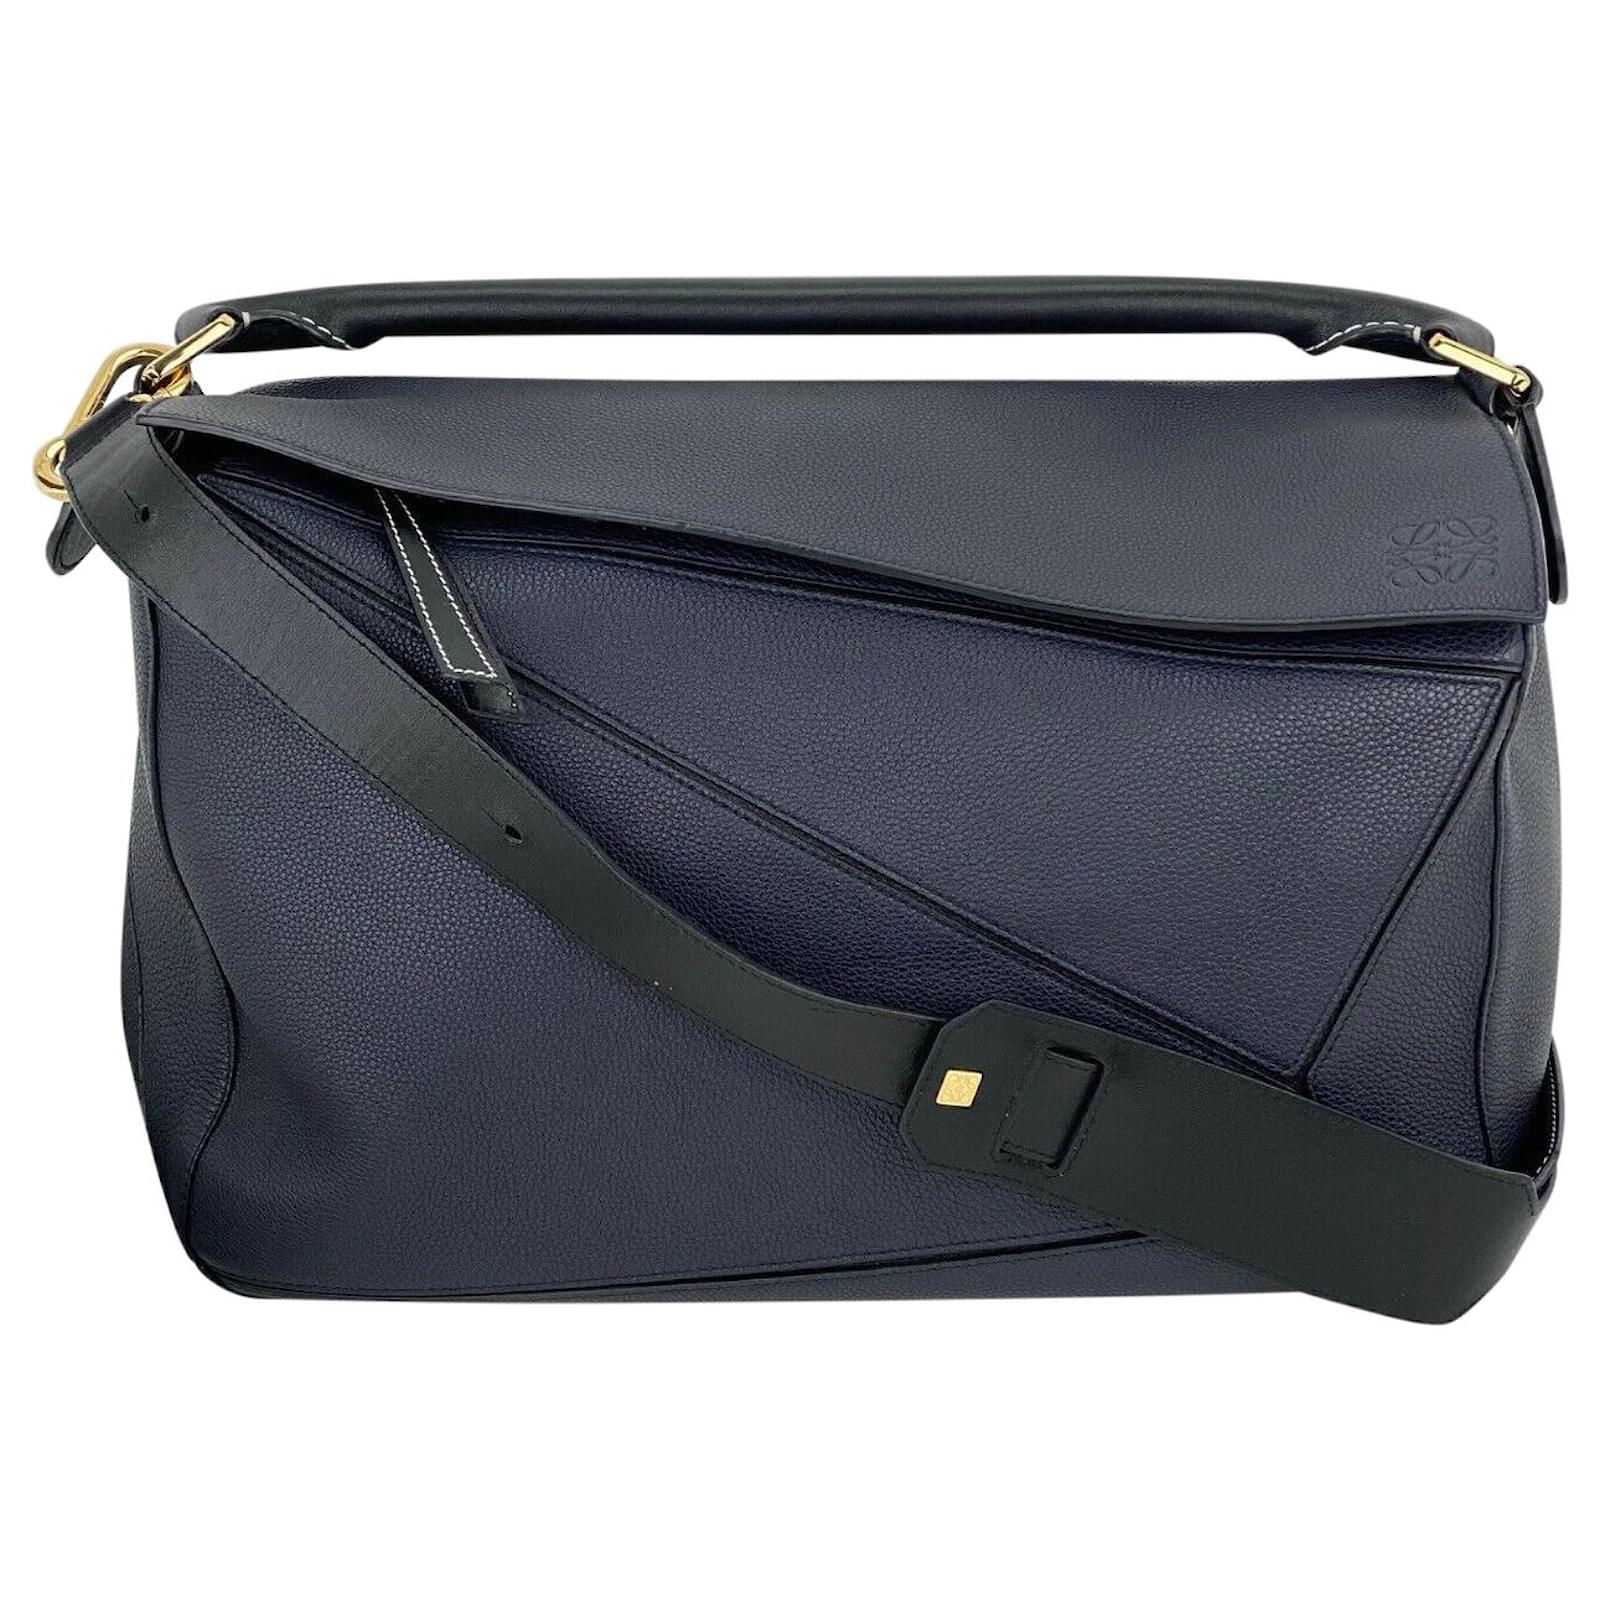 Loewe Navy Leather Puzzle Bag in Blue